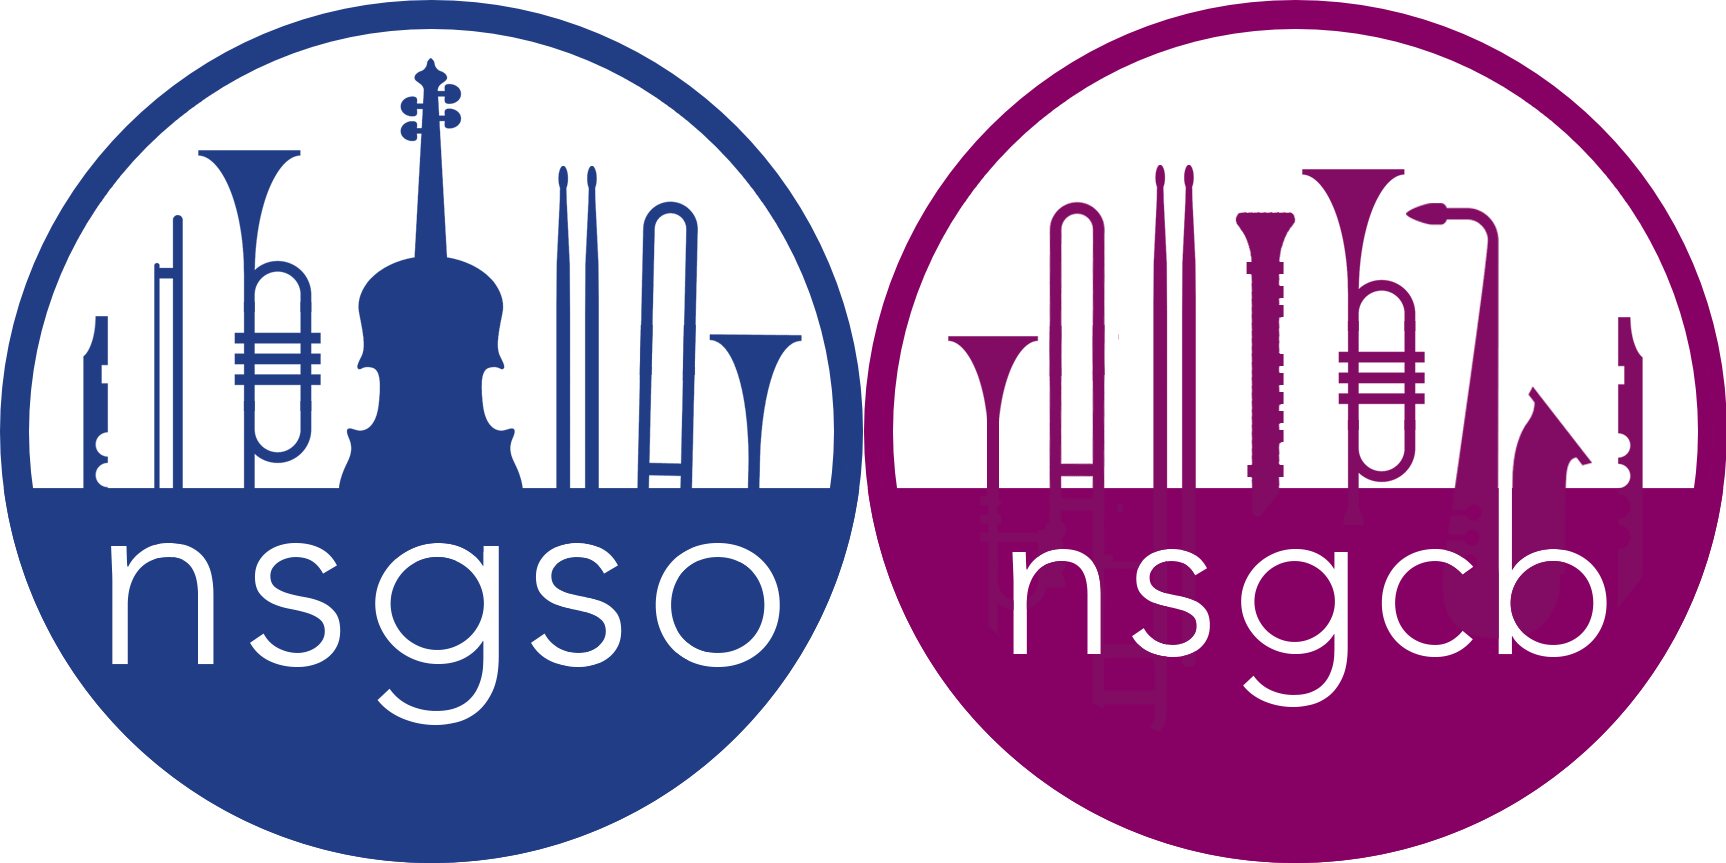 The National Scout and Guide Symphony Orchestra and Concert Band Logo